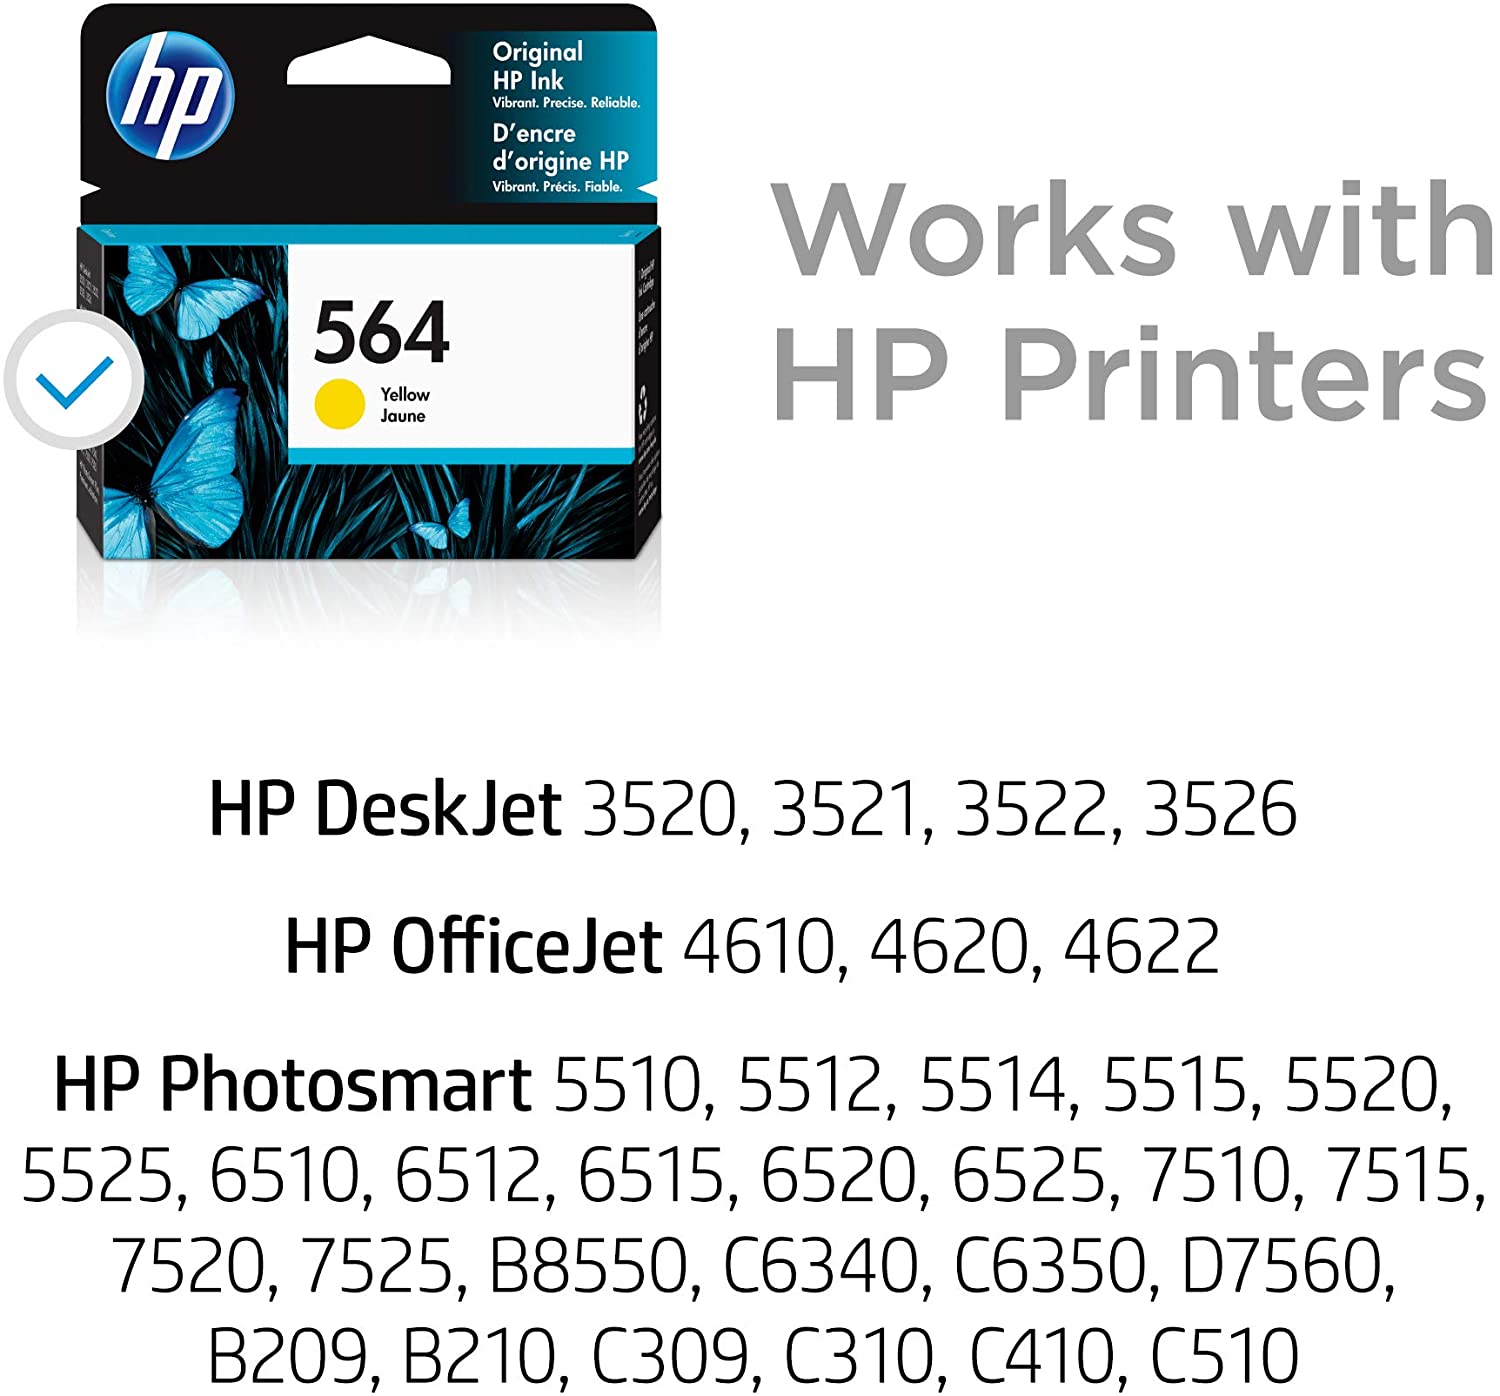 [CLEARANCE] Original HP 564 Yellow Ink Cartridge - Genuine HP Ink CB320WA CB320A CB320 Color Ink (300 Pages)